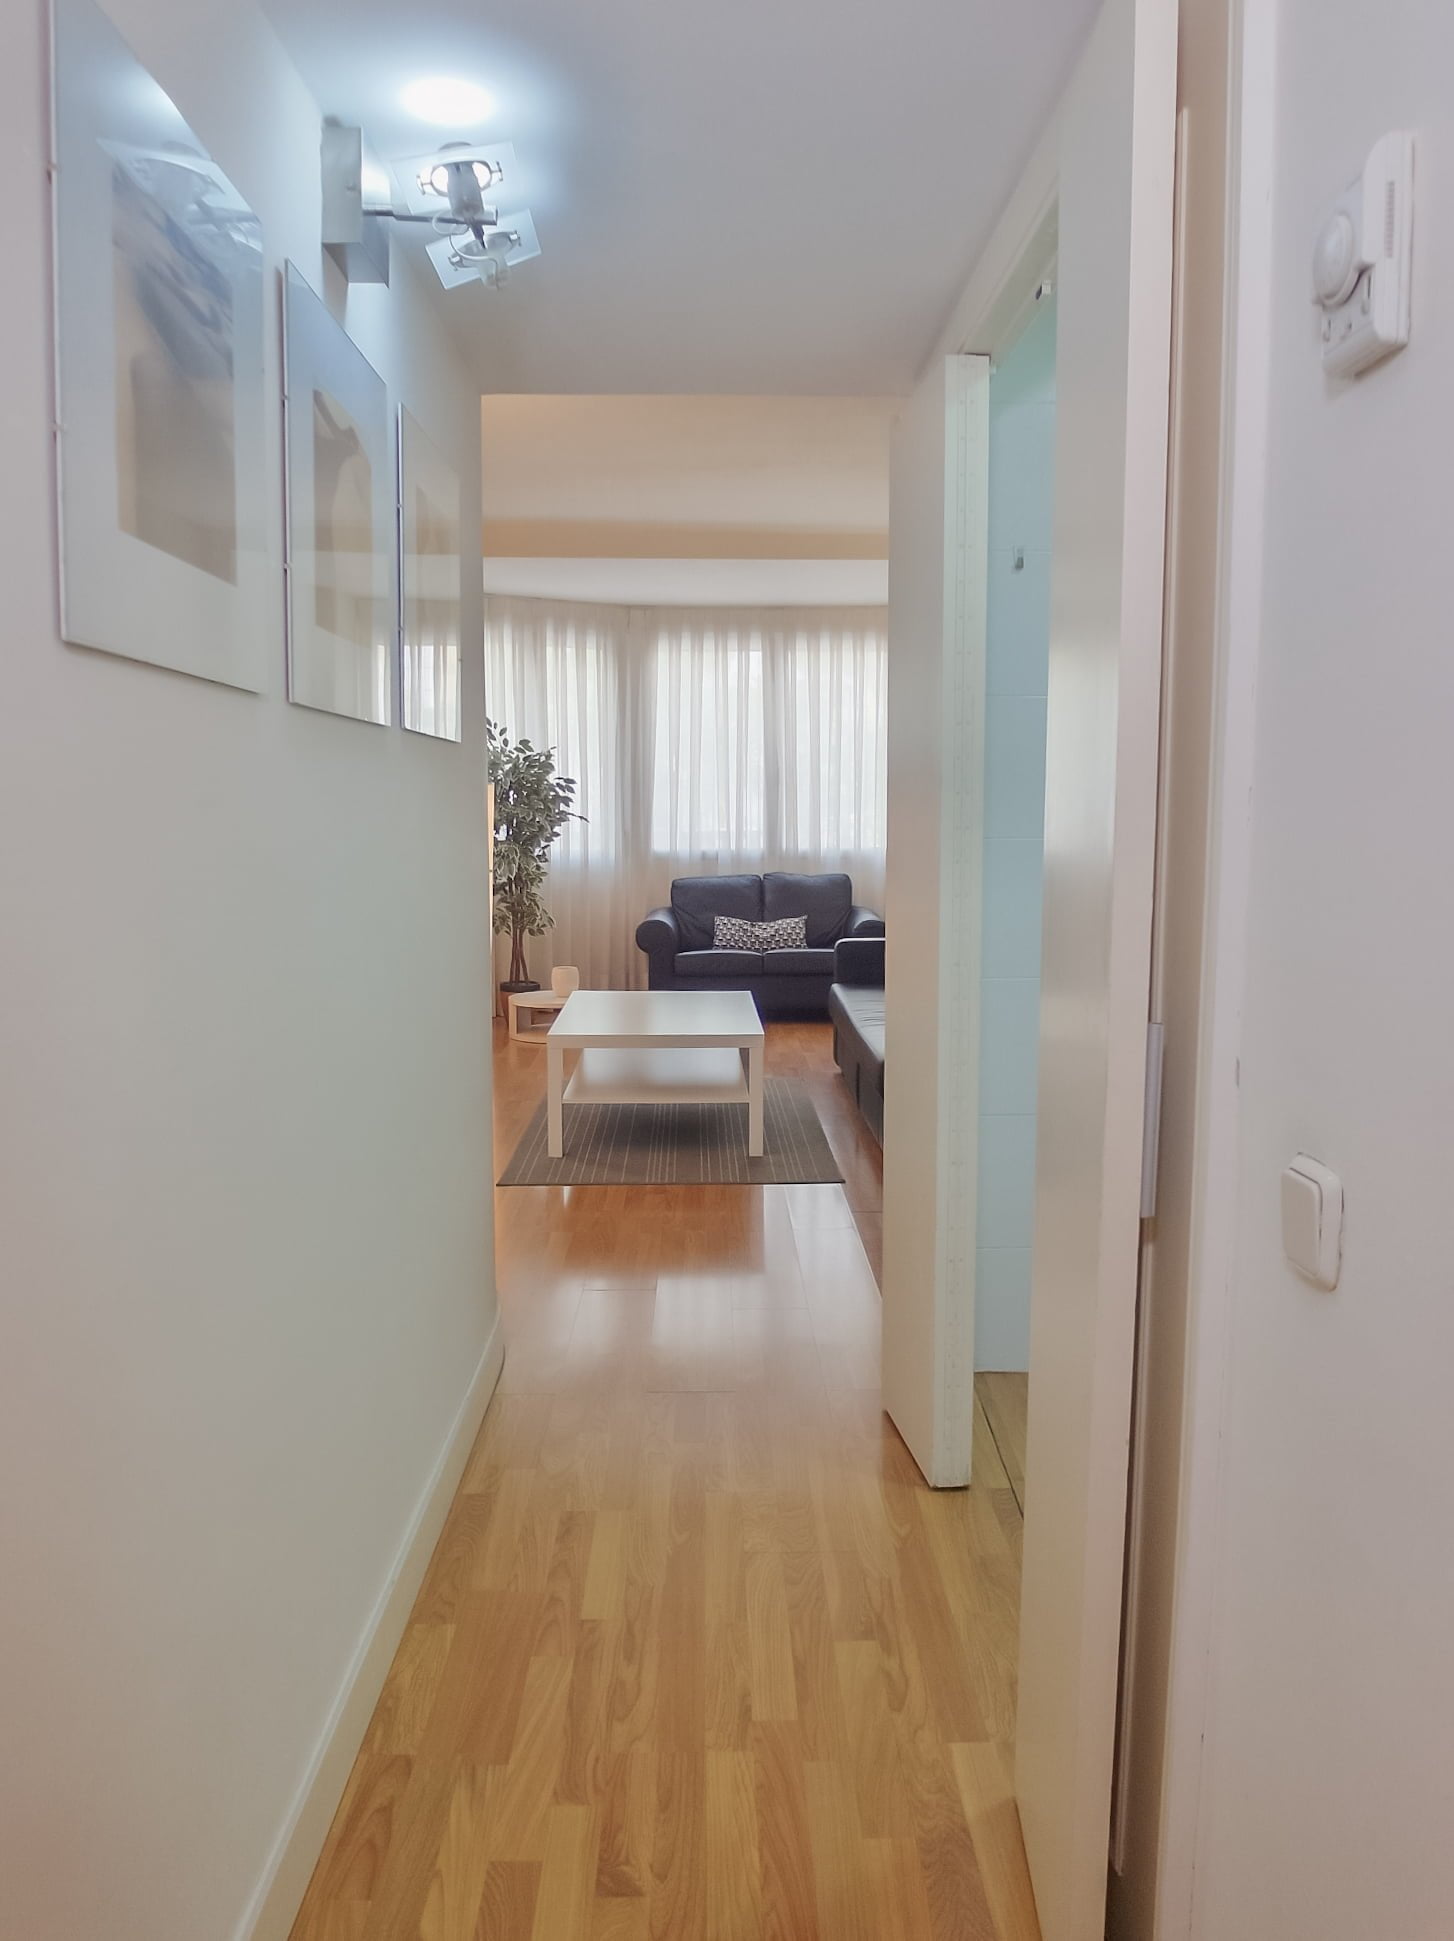 Furnished flat in Madrid for expats